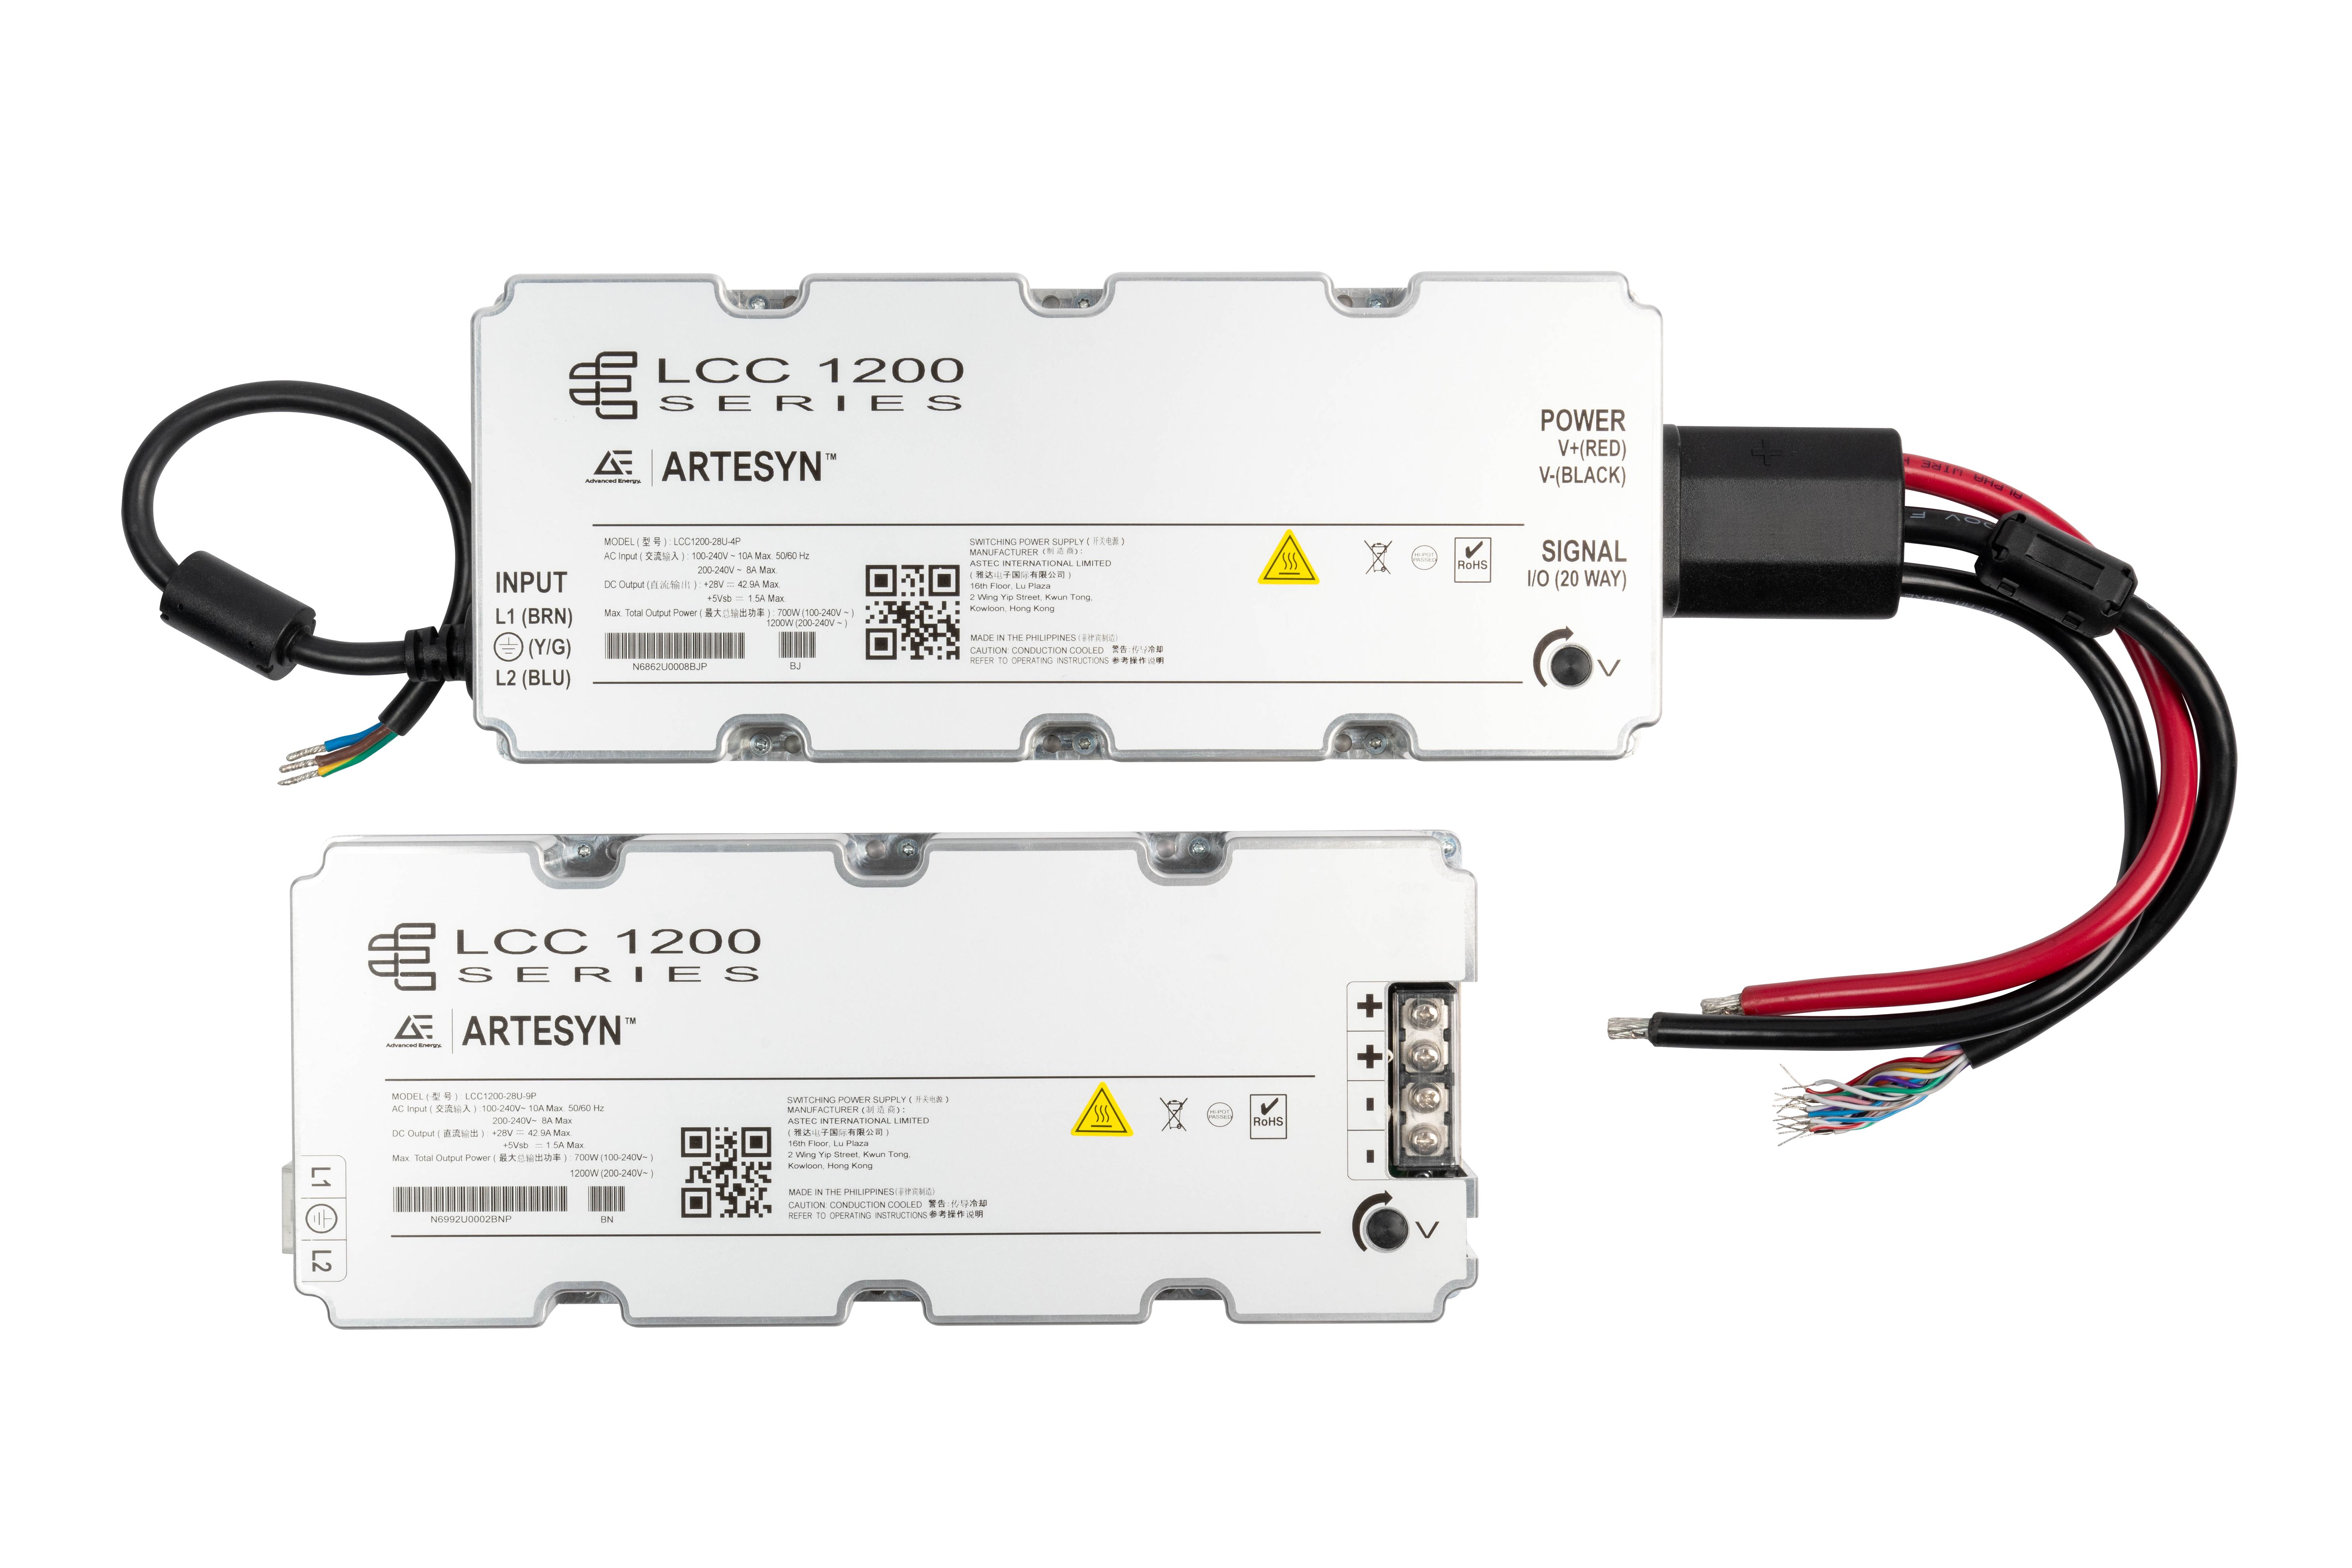 Advanced Energy’s LCC1200 Series Enhances Reliability and Reduces Overall System Cost in High Power Industrial Applications